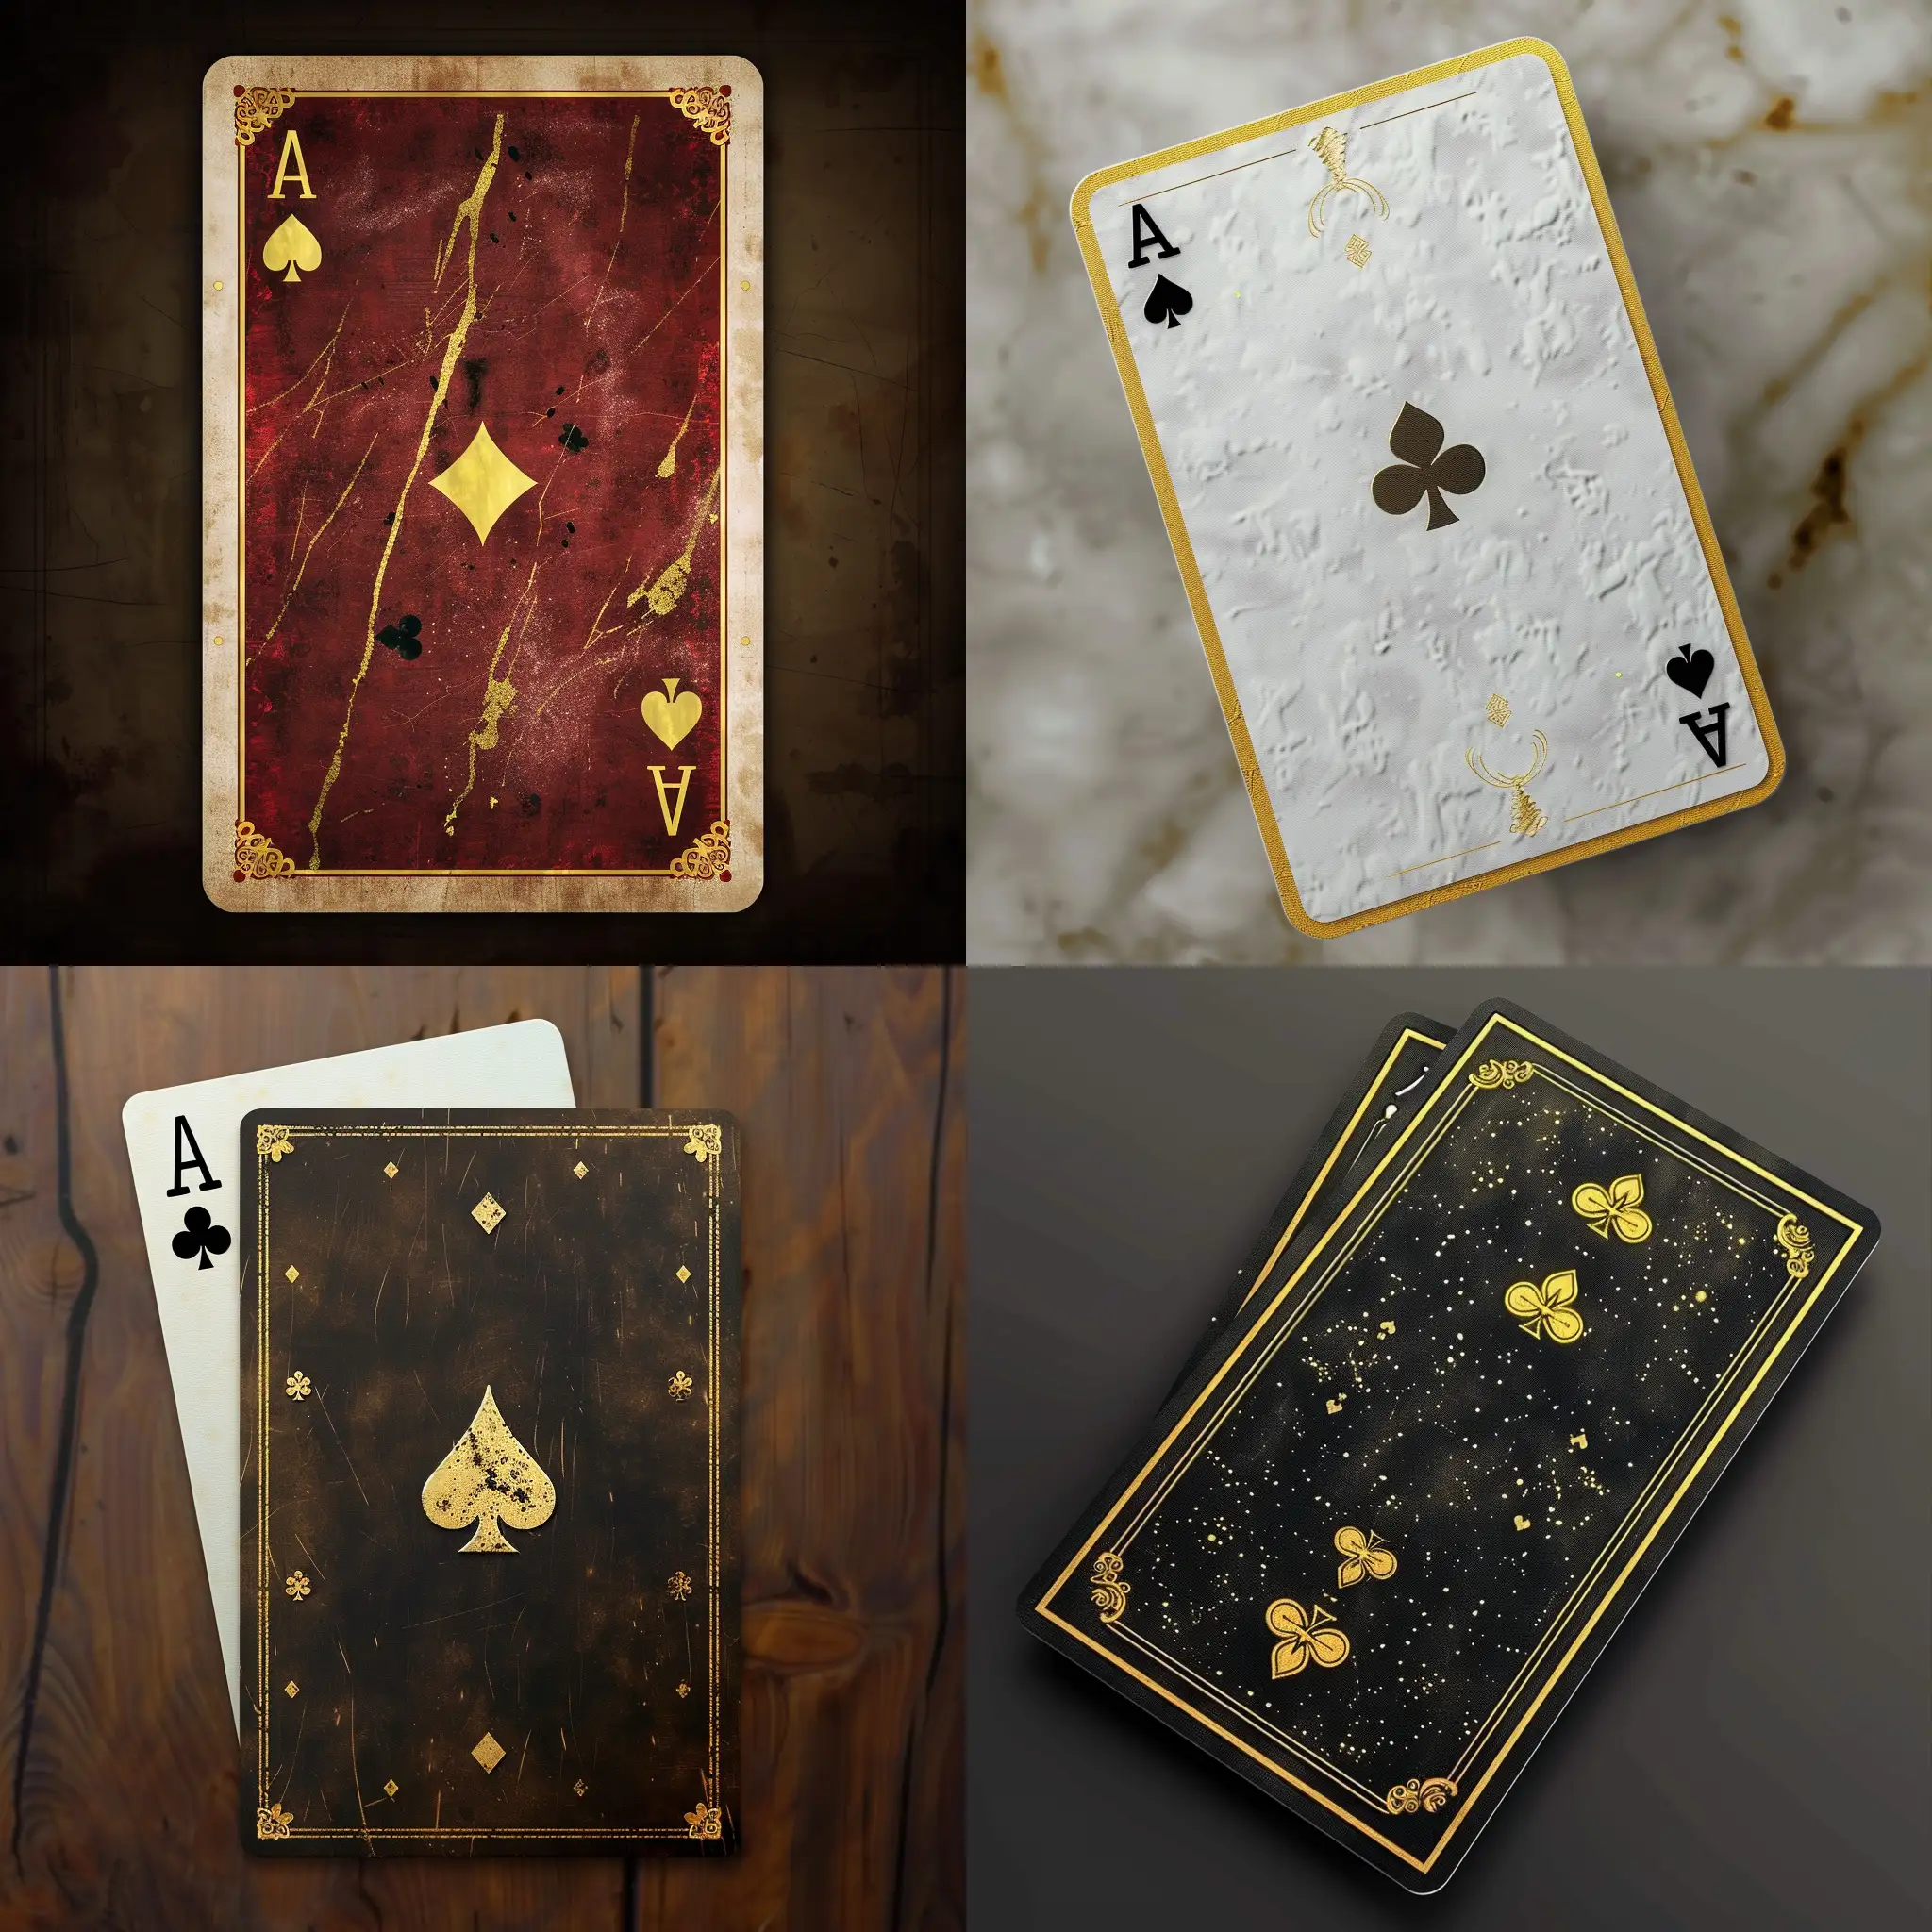 Golden-Trimmed-Playing-Card-Design-with-Unique-Texture